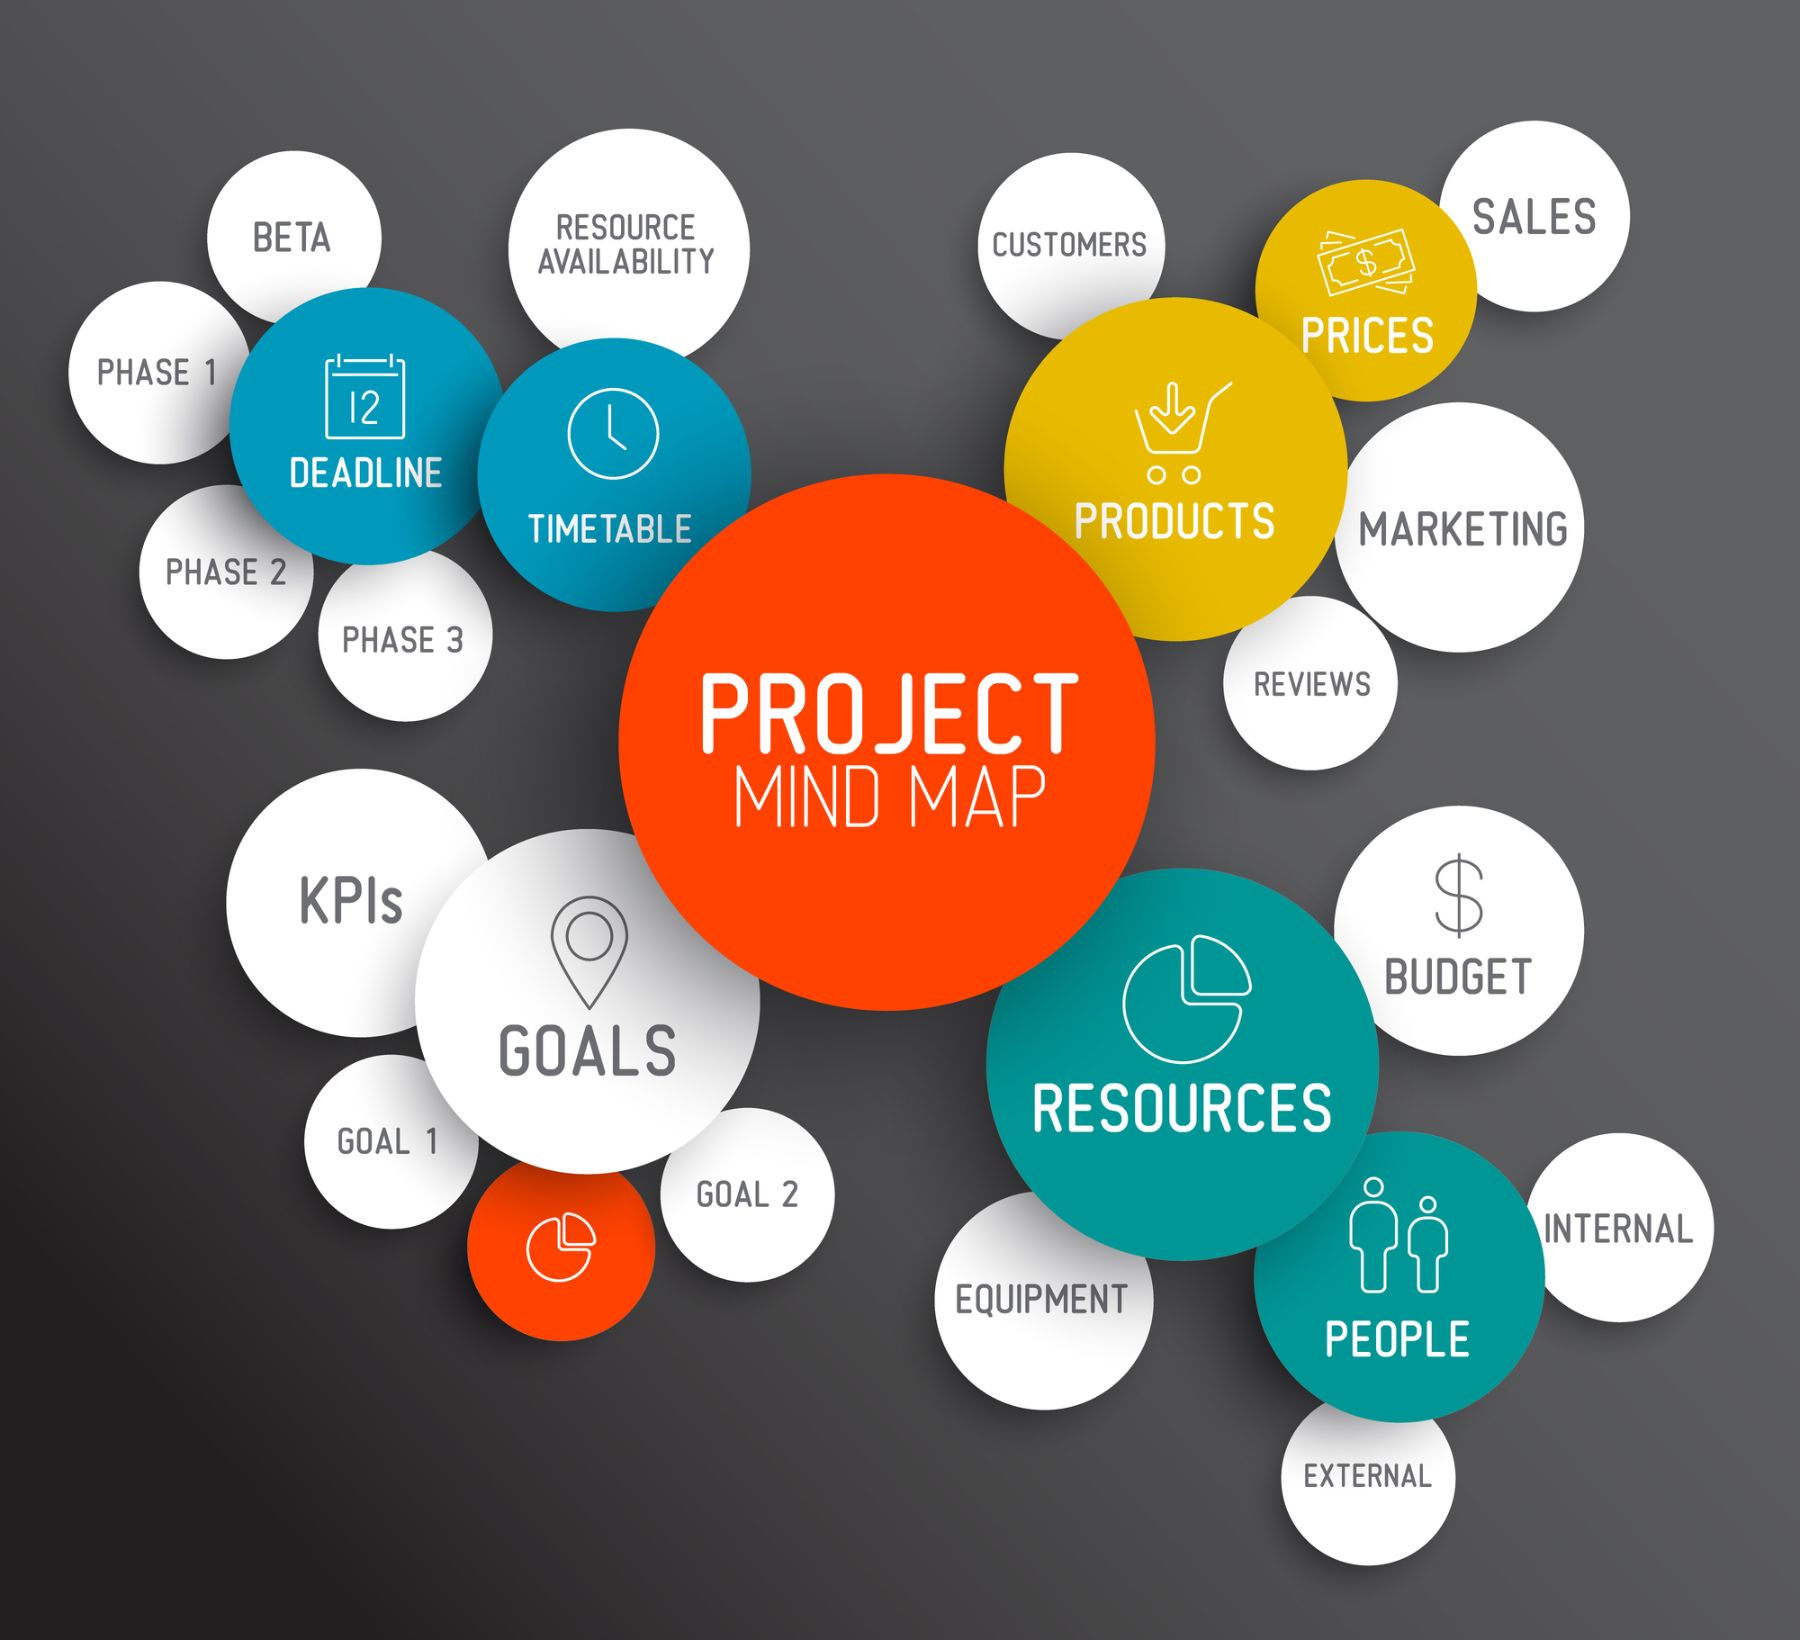 Project manager's tasks